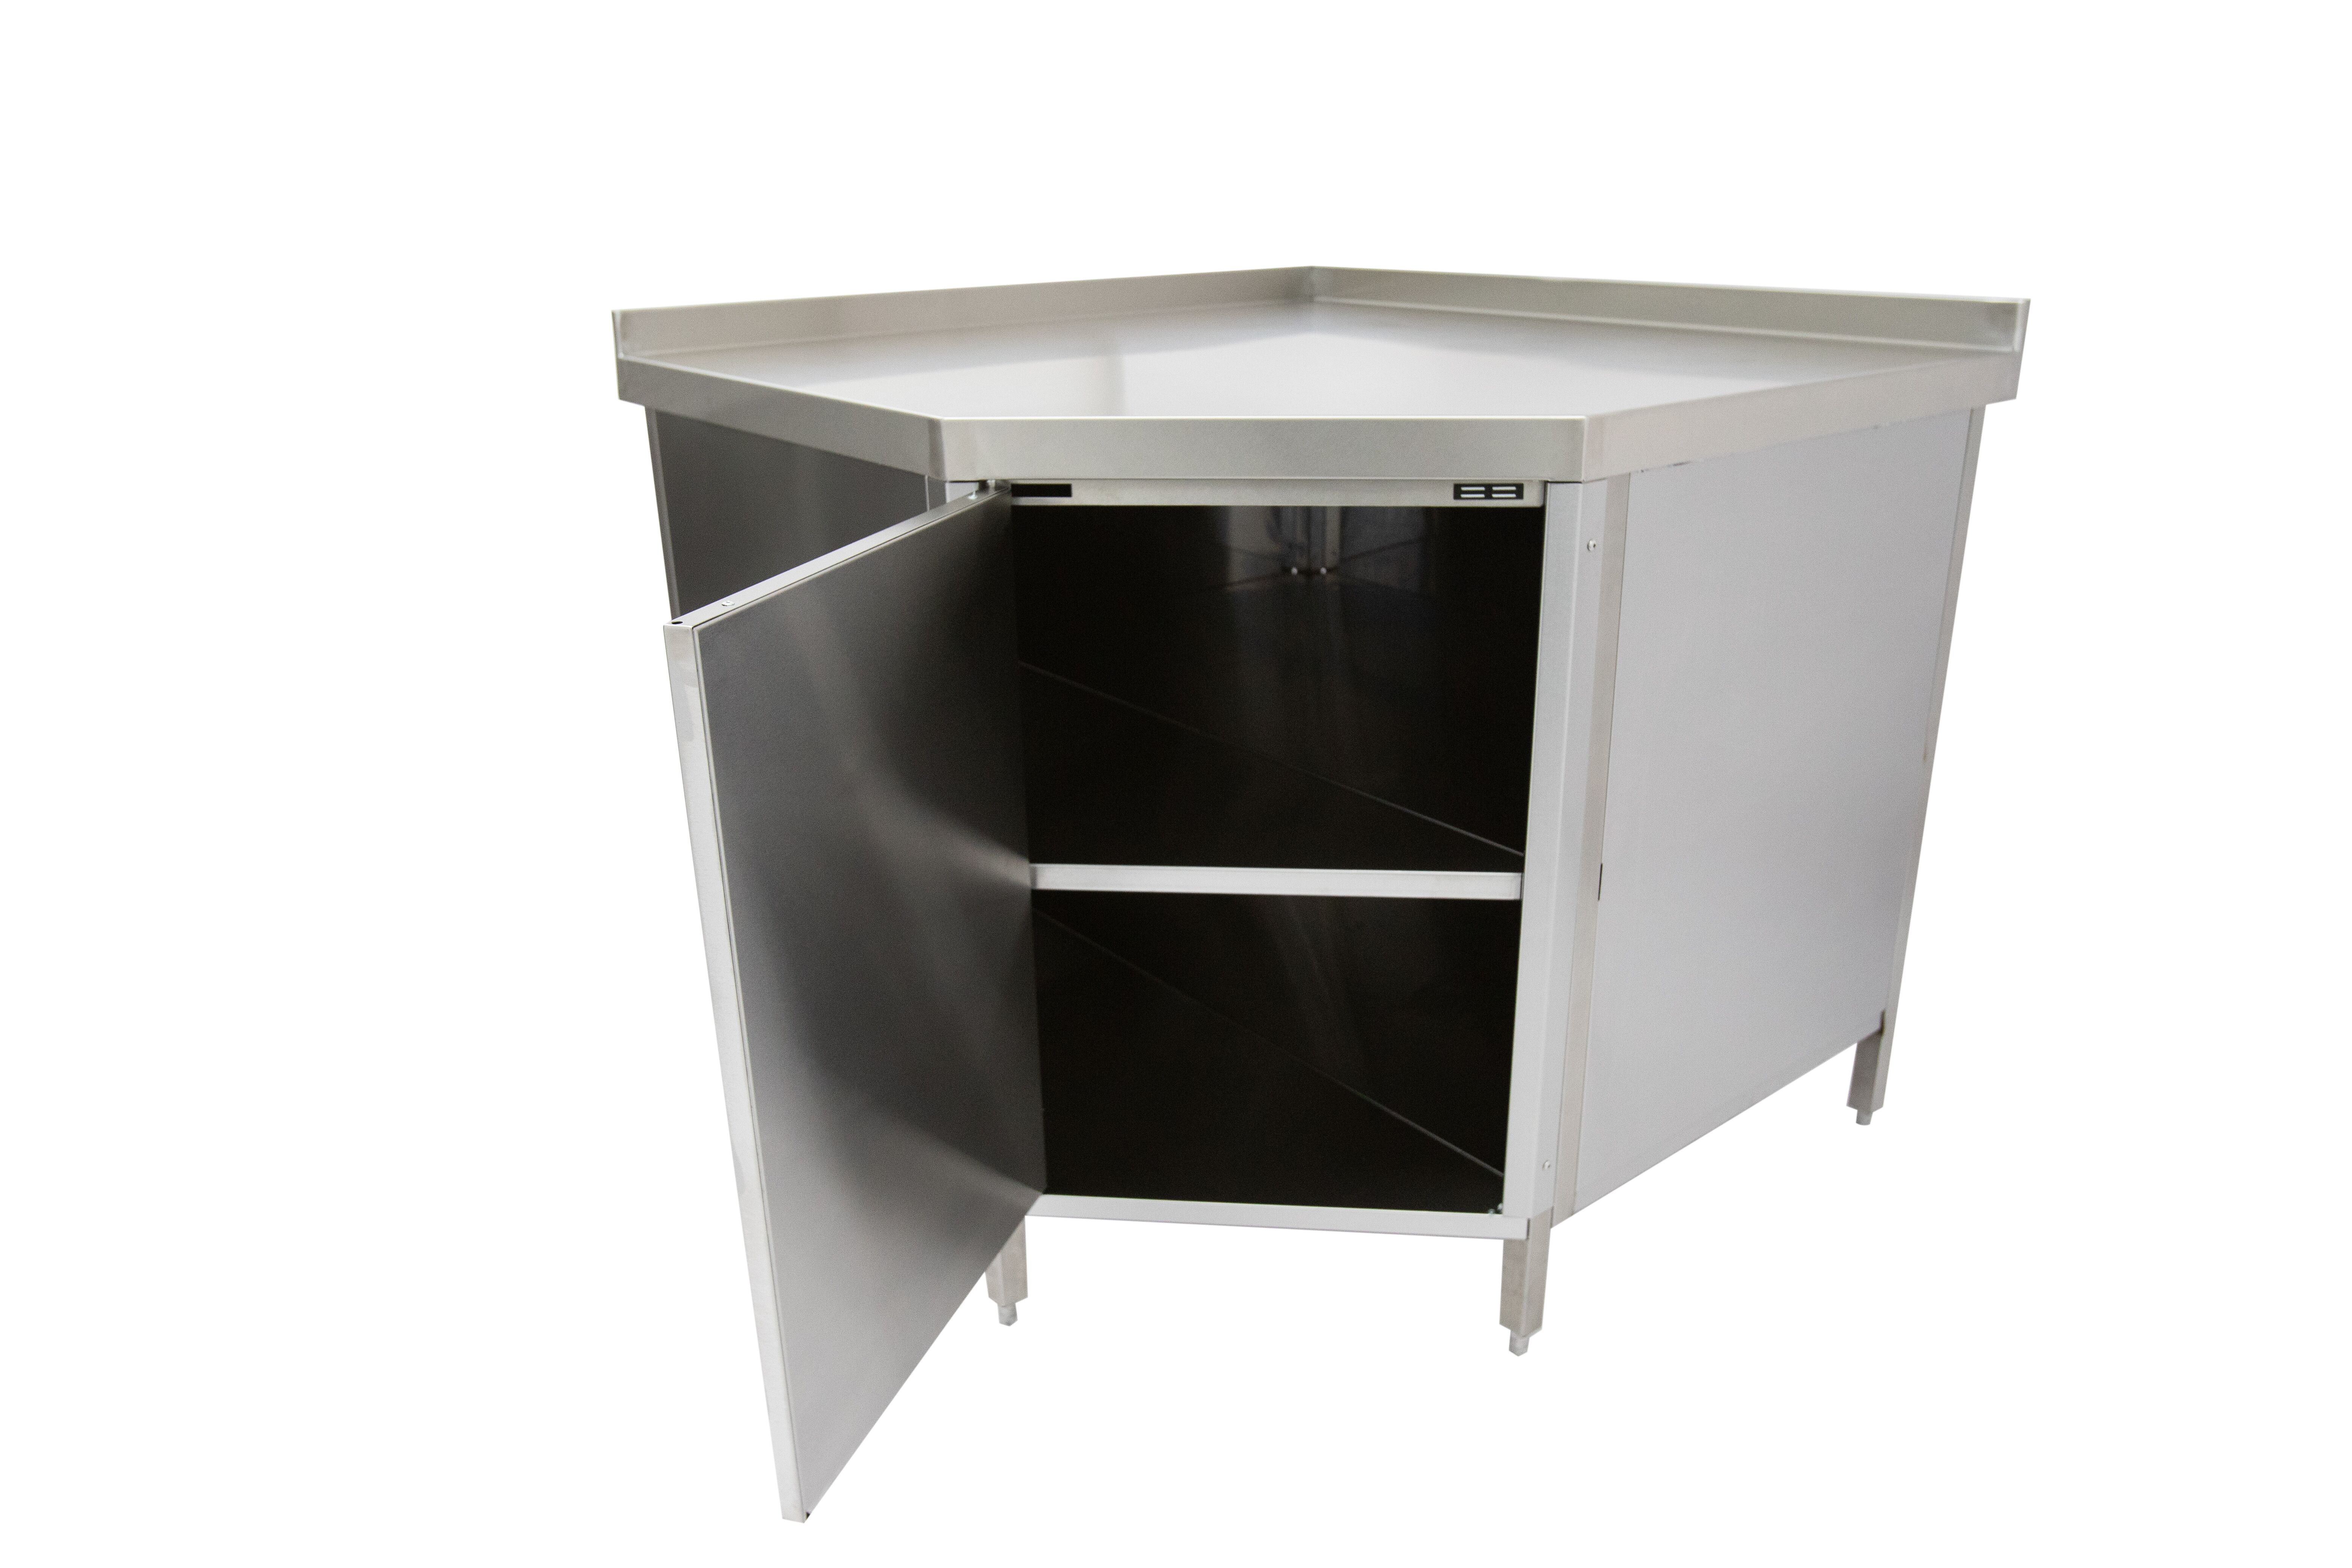 Parry CUPBD650 - Stainless Steel Corner Unit